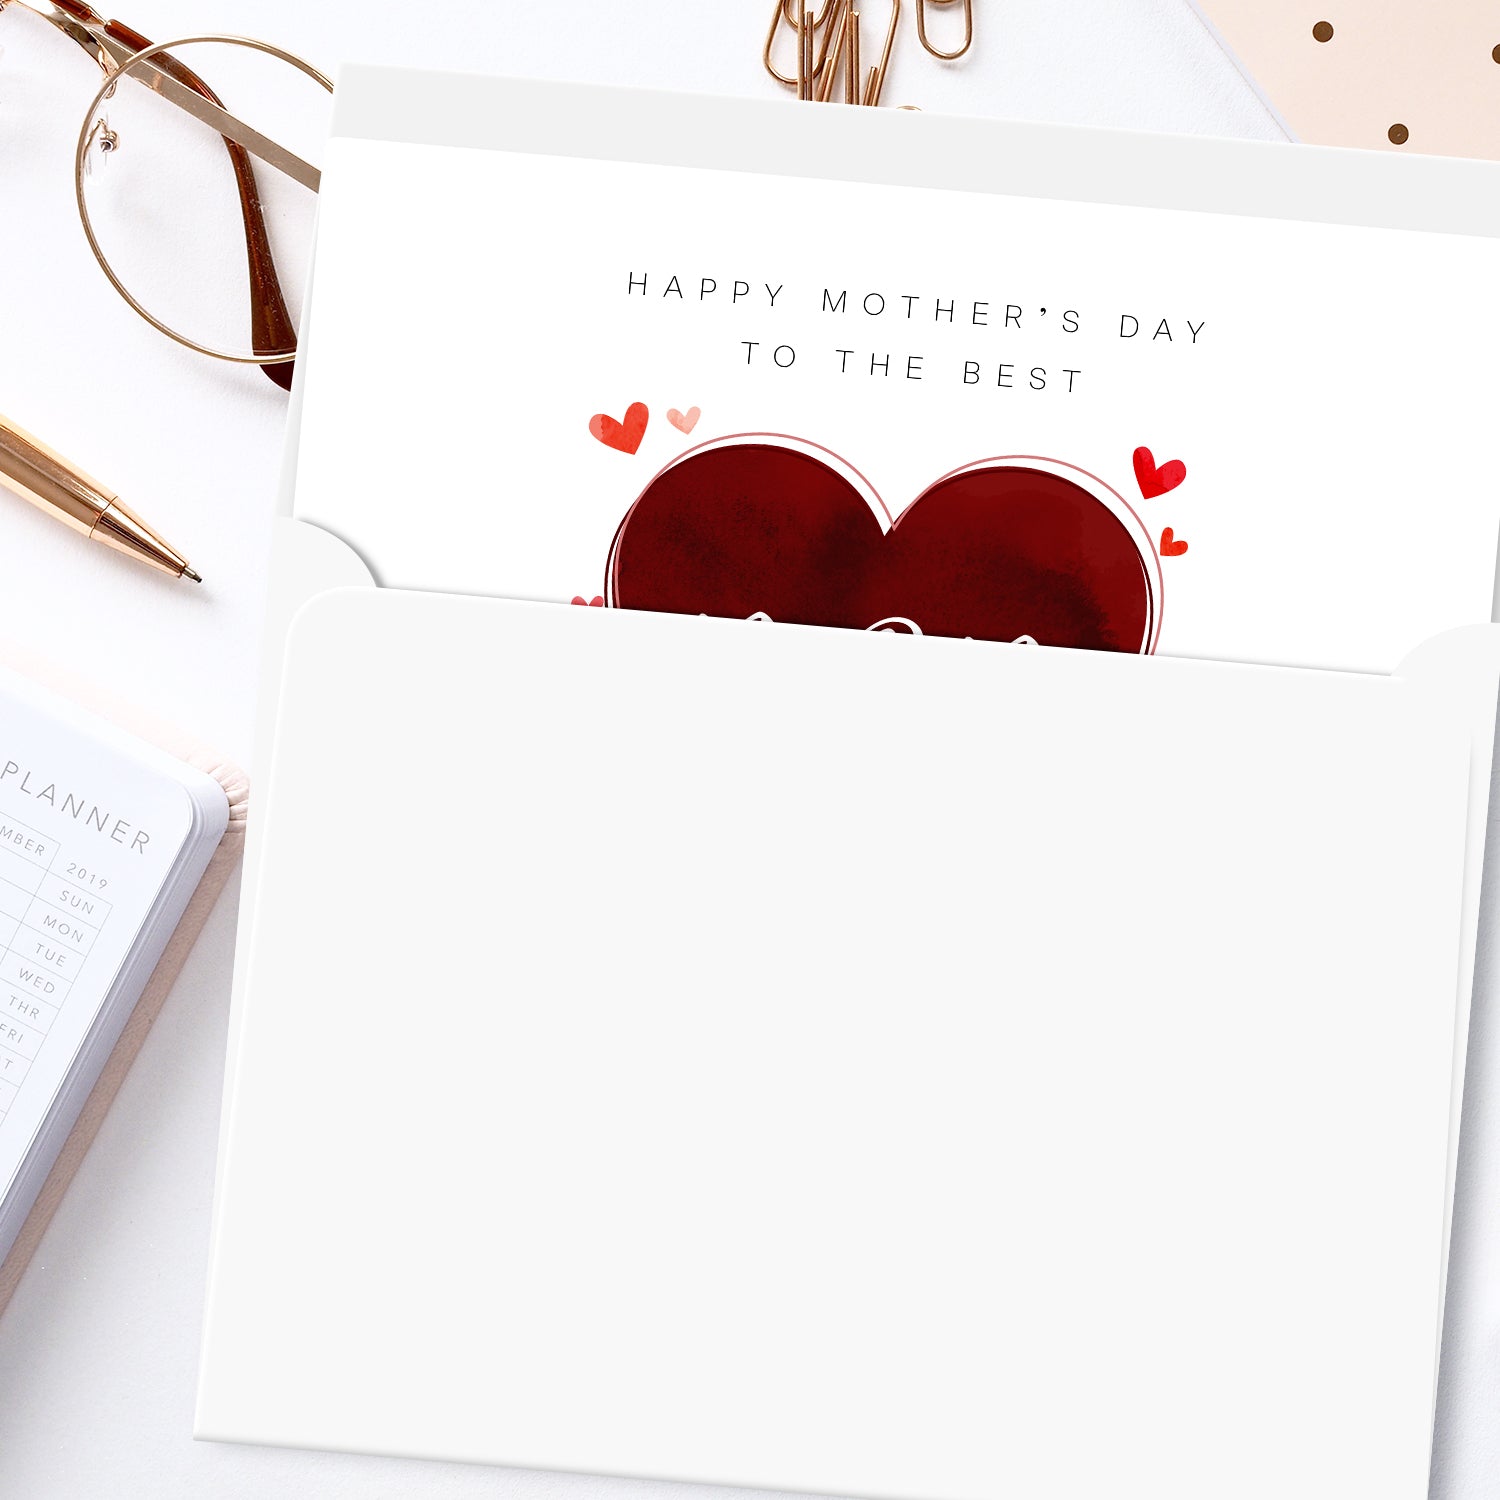 Happy Mother's Day to the Best Mom in the World – Thank You Greeting Cards and Envelopes for Mom, Wife | 4.25 x 5.5 | 10 per Pack